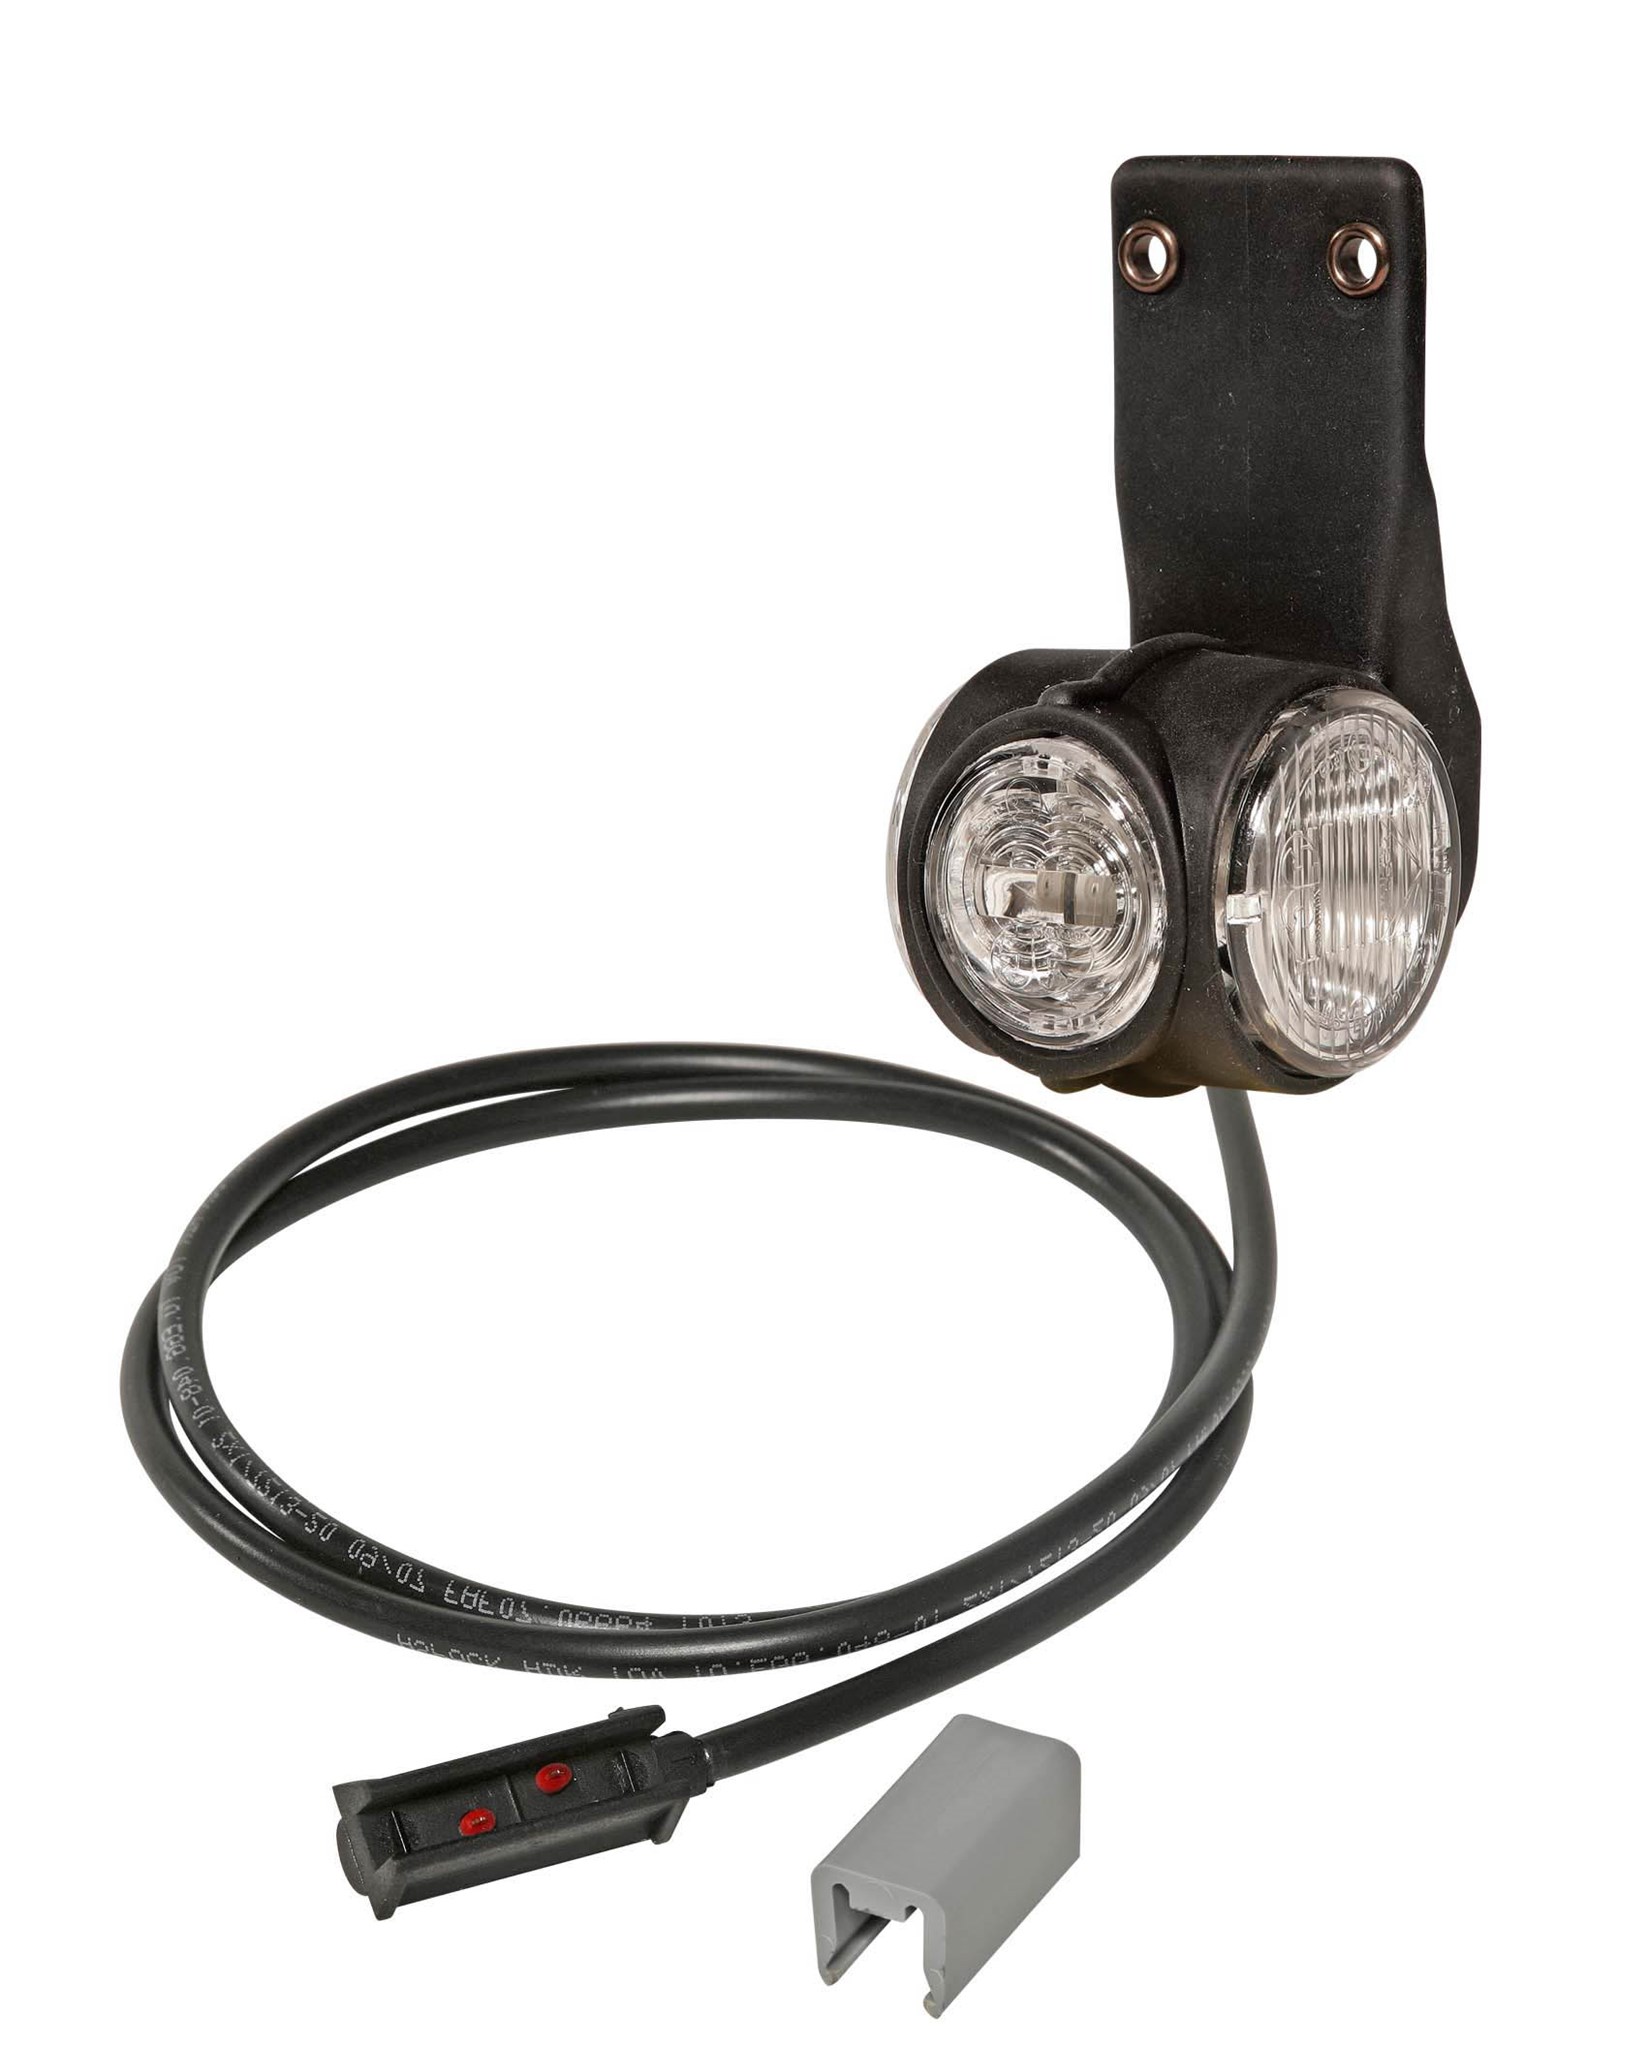 Picture of 31-3364-027 Aspöck Superpoint III rechts, Pendelhalter P&R 1500mm ro/we/or, LED